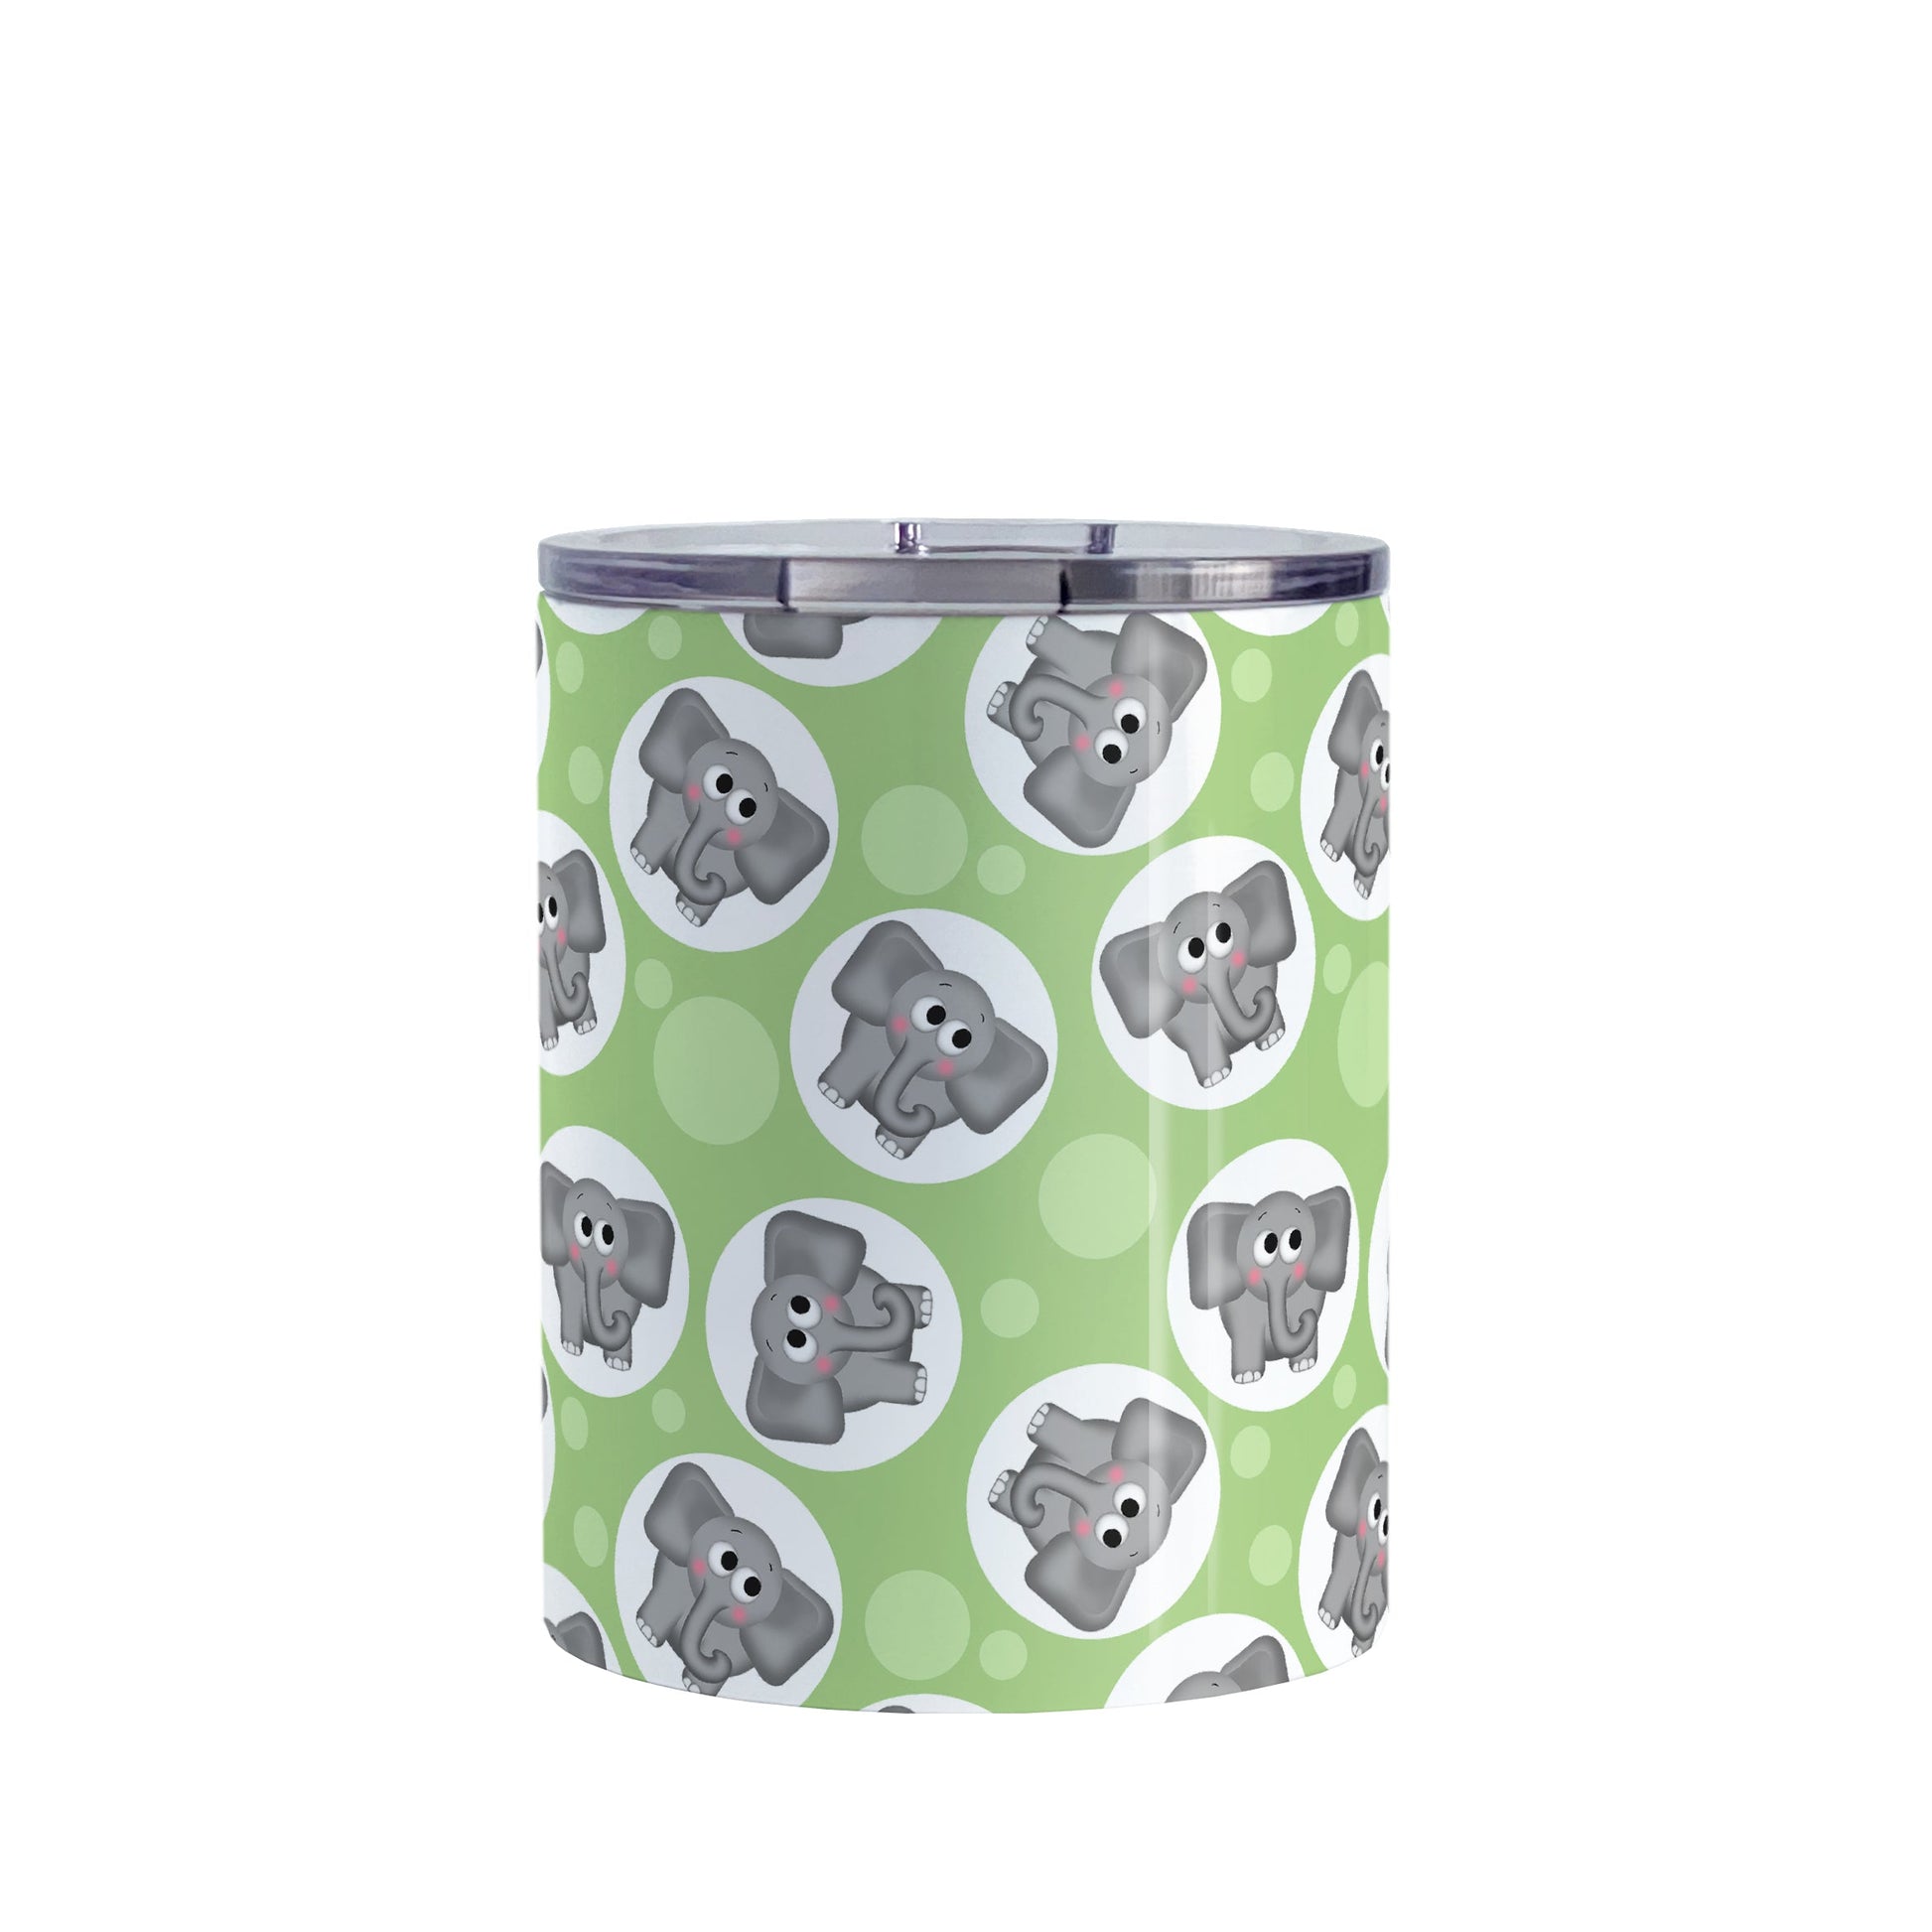 Cute Green Elephant Pattern Tumbler Cup (10oz, stainless steel insulated) at Amy's Coffee Mugs